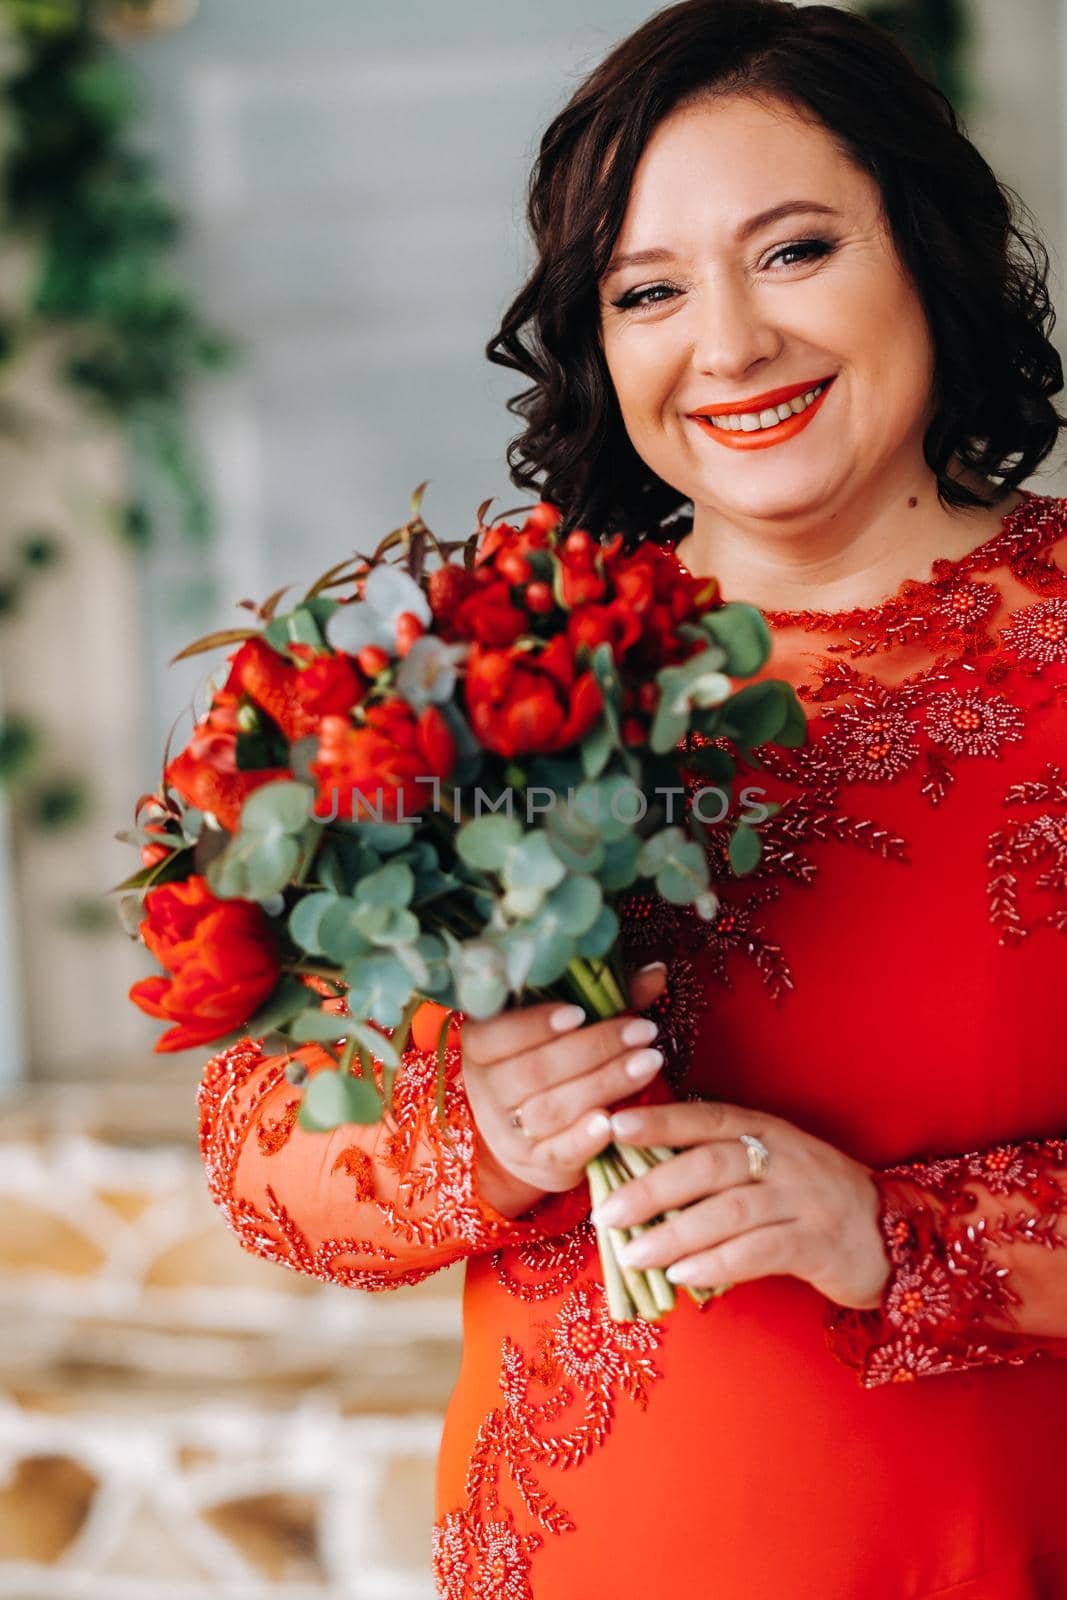 a woman in a red dress stands and holds a bouquet of red roses and strawberries in the interior